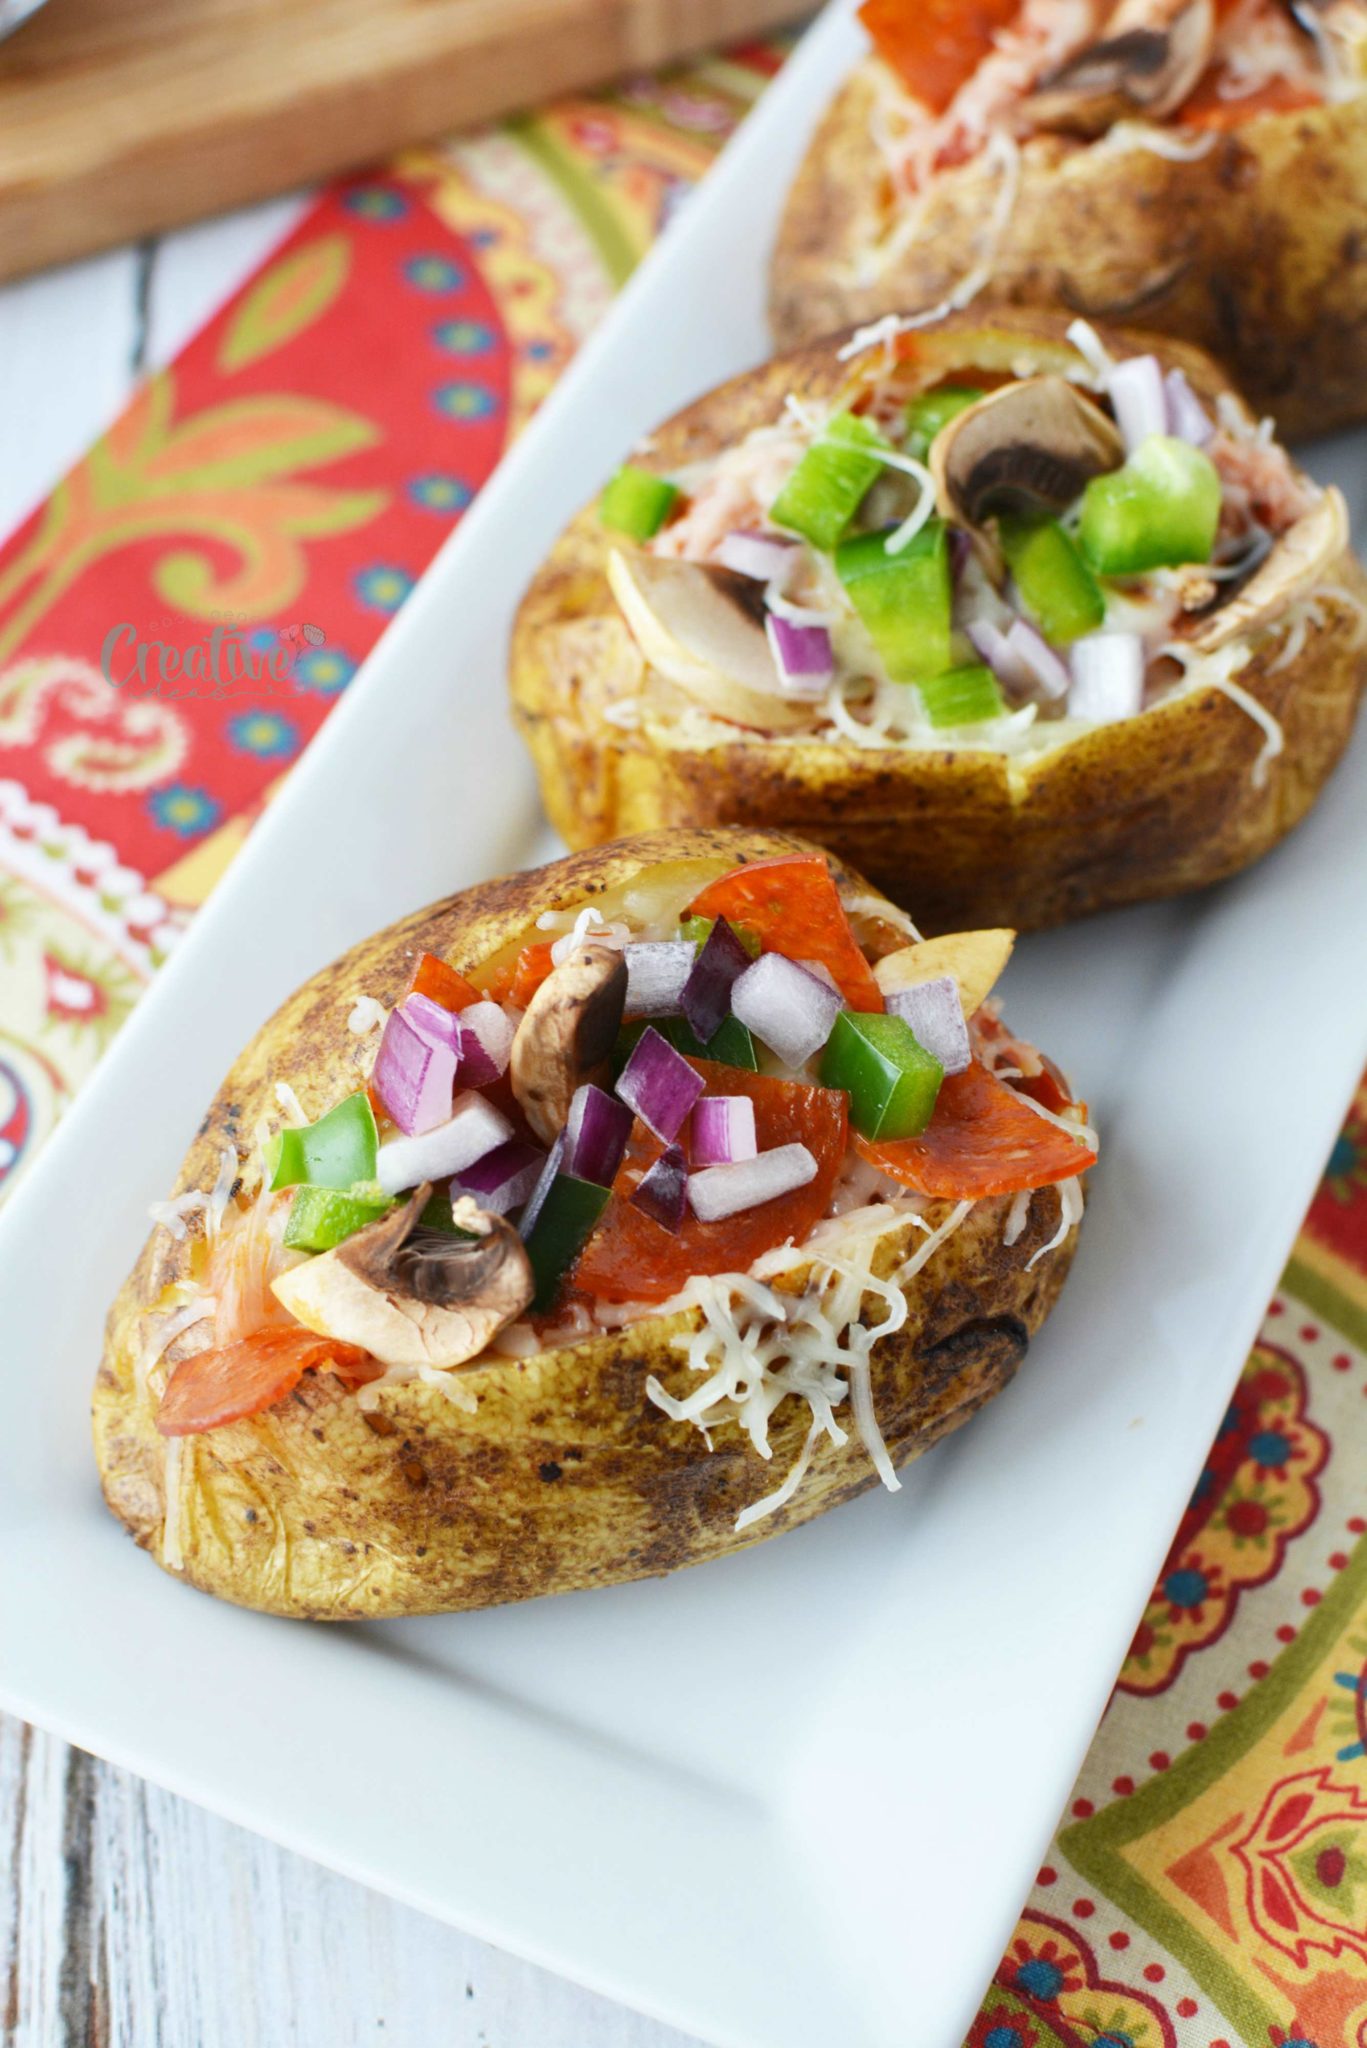 Lip-smacking Pizza Baked Potatoes You Will Just Have To Make